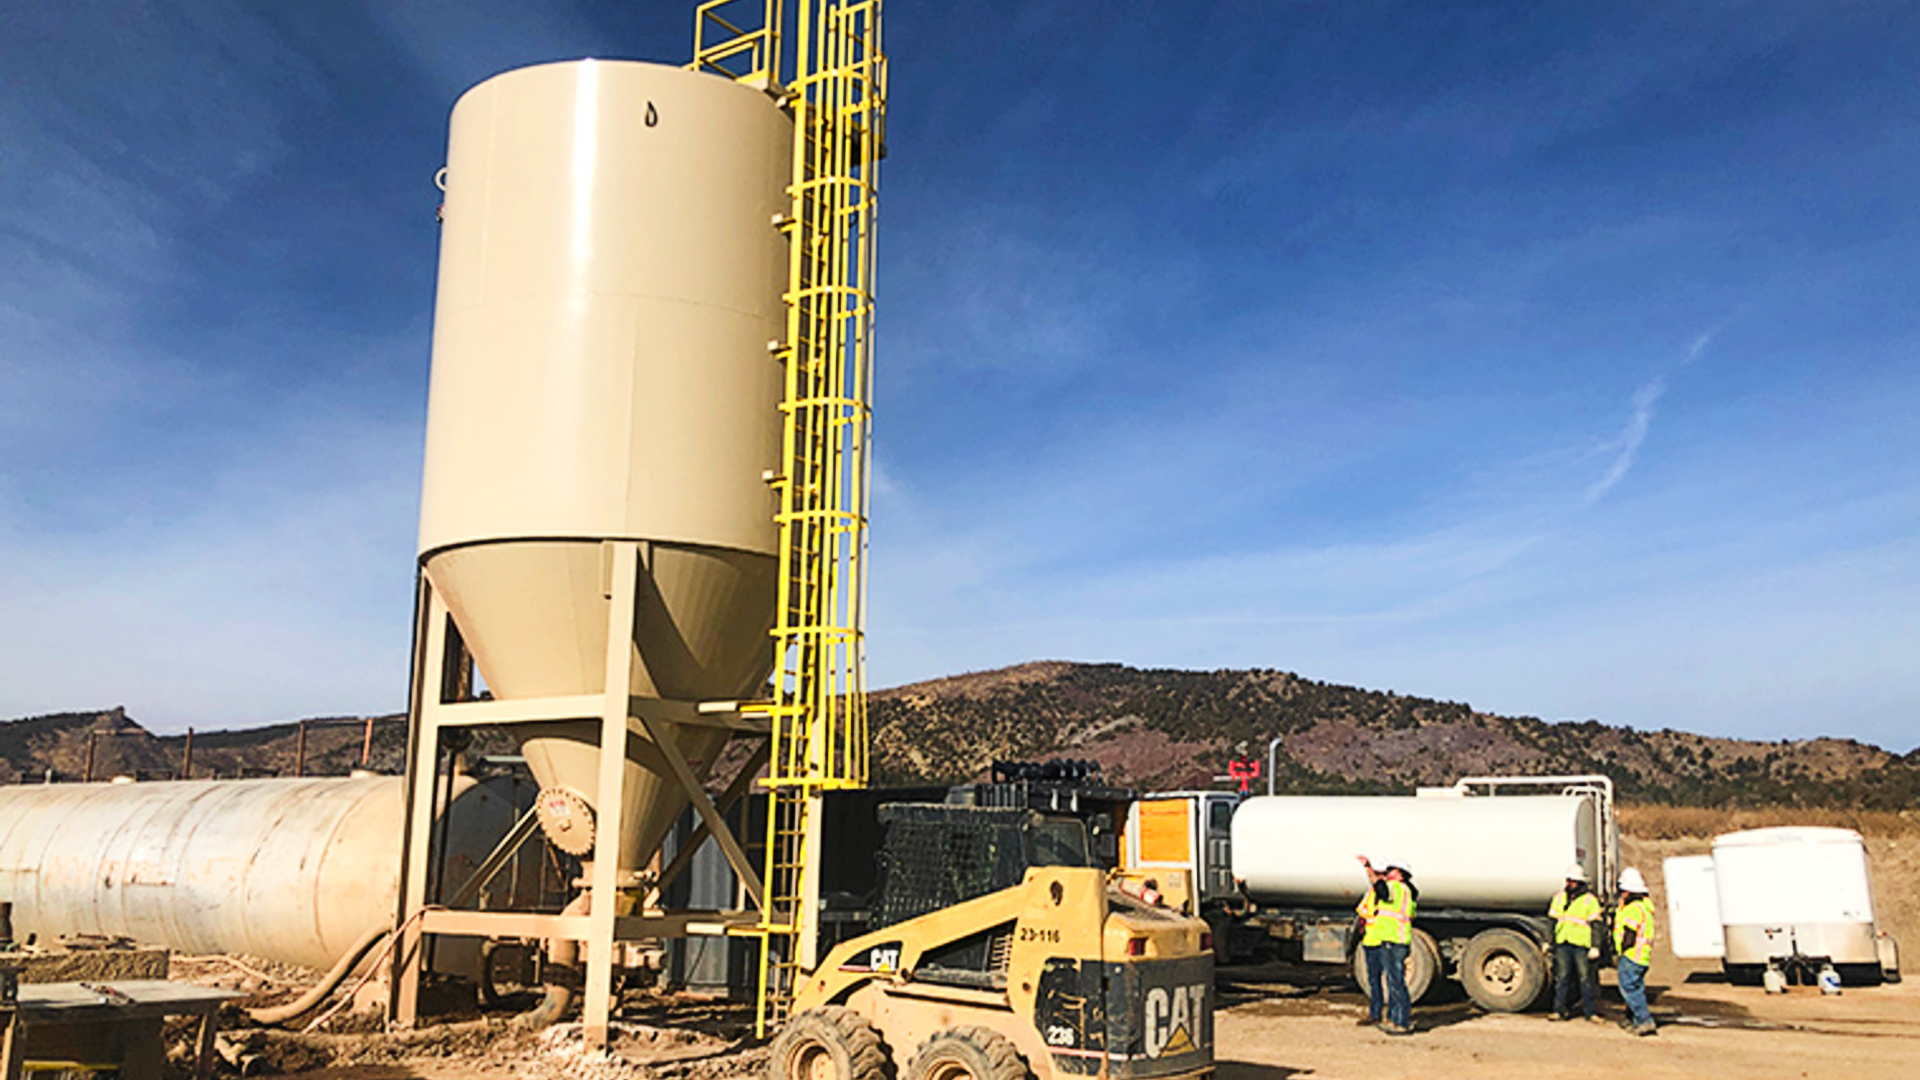 Clearwater high compaction vertical slurry thickener at a job site in southern Colorado with heavy equipment and workers standing around.